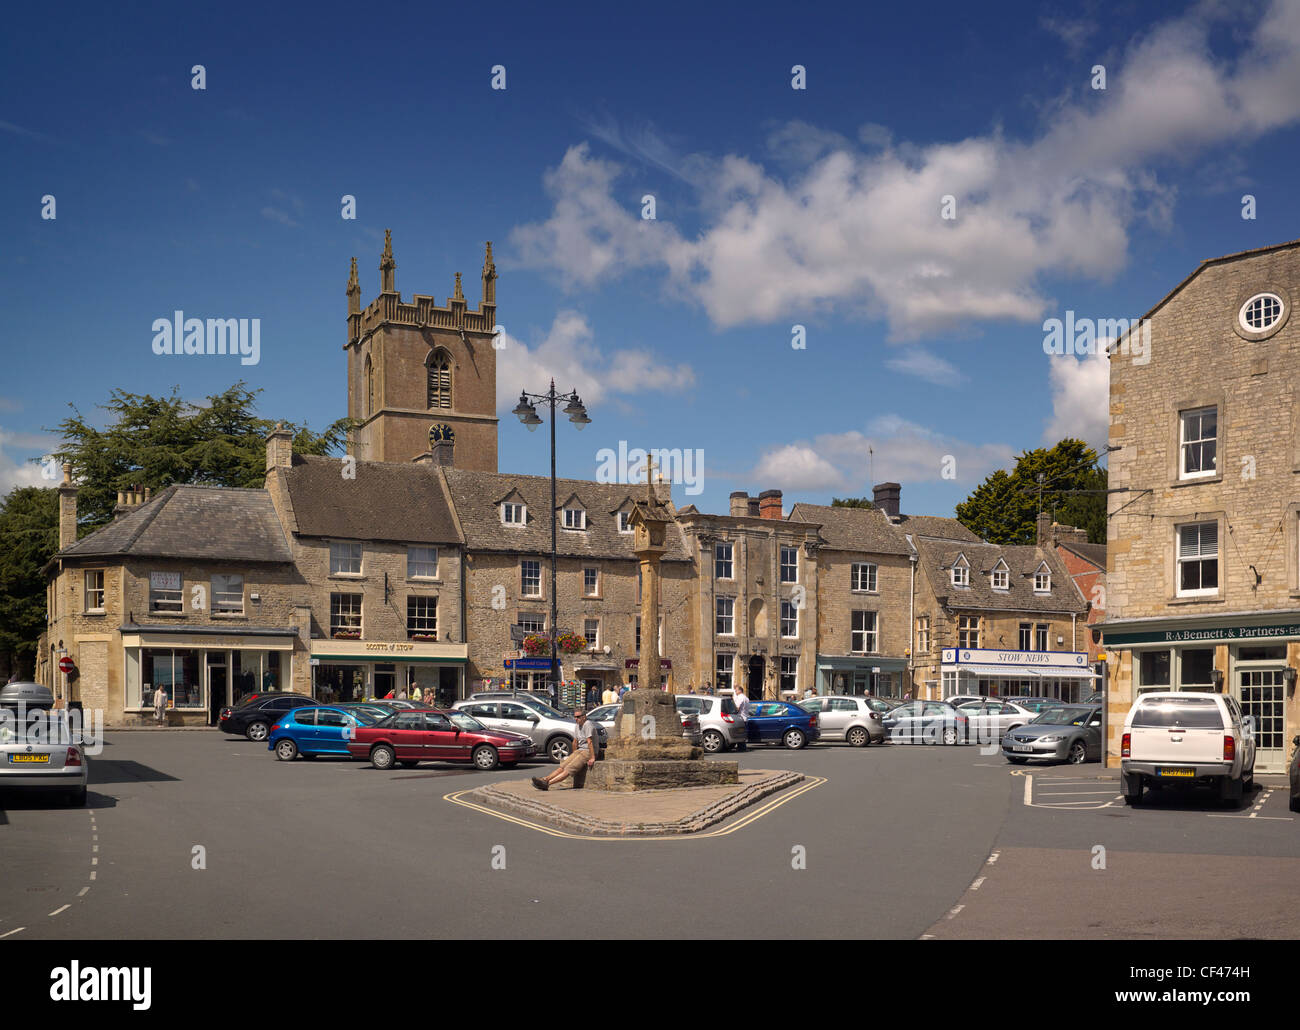 The church tower and sandstone buildings of Stow on the Wold in the Cotswolds. Stock Photo